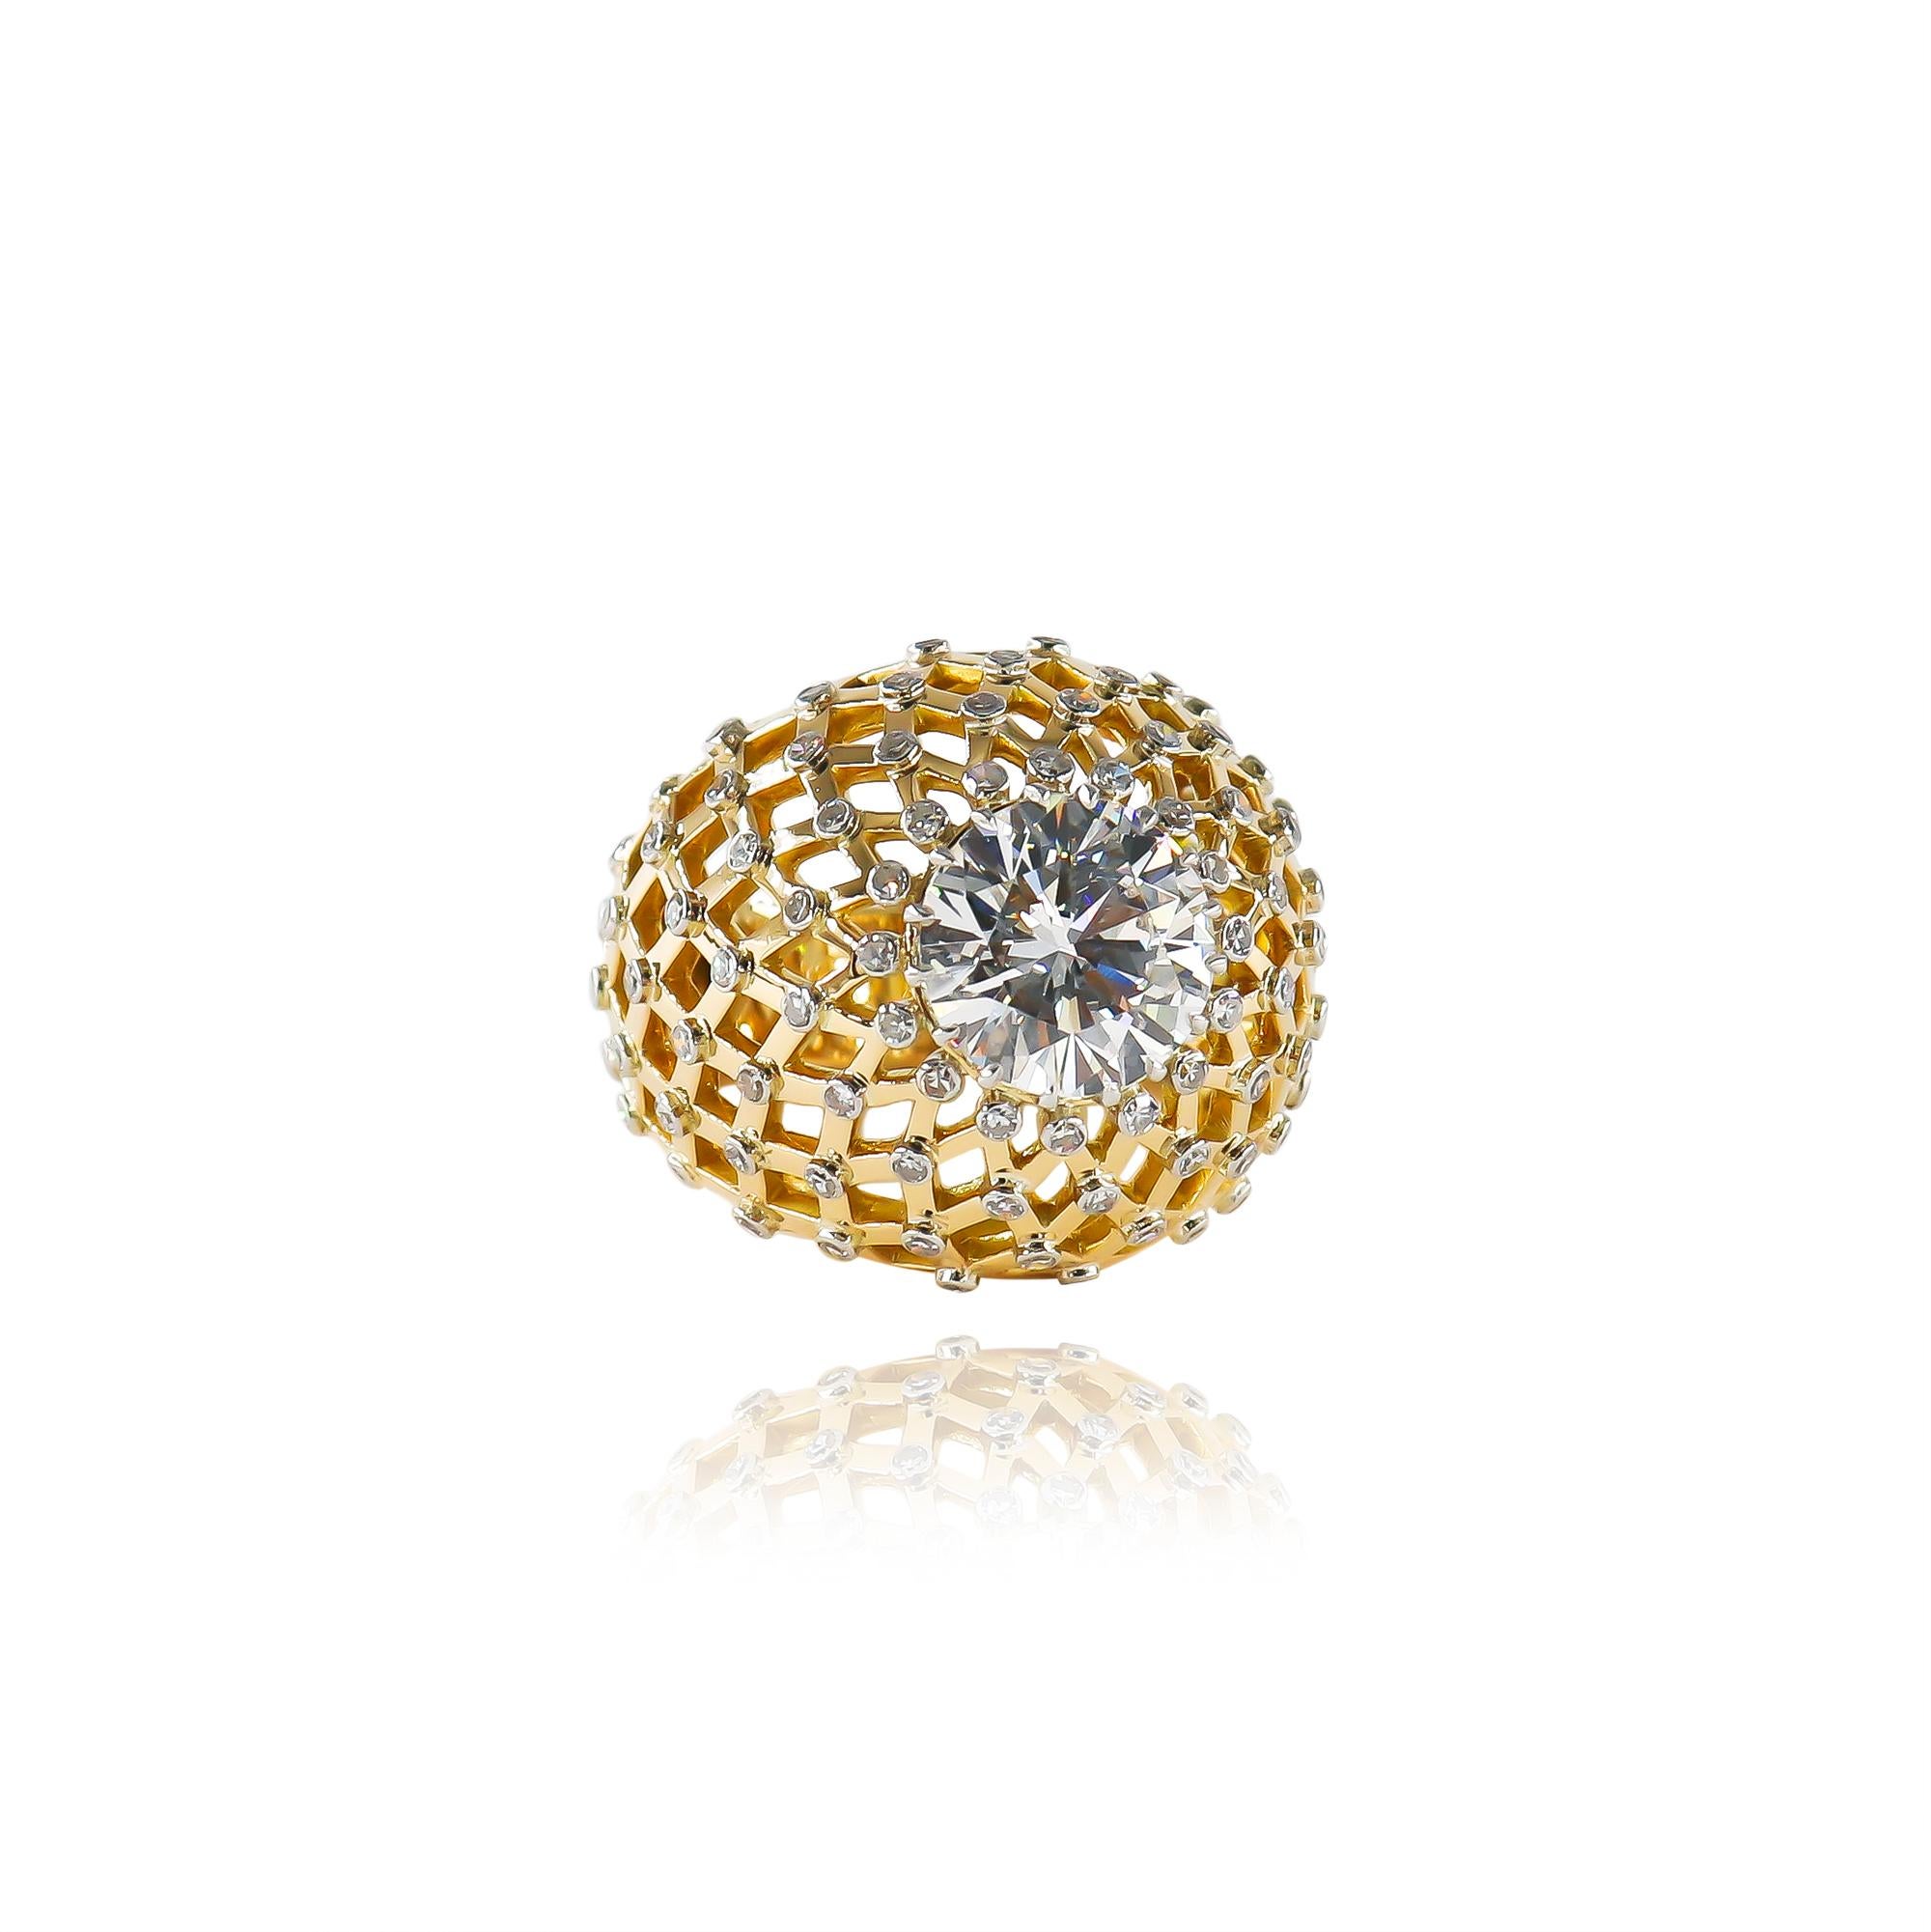 Contemporary Van Cleef & Arpels 18K Dome Lattice Ring with 3.71 carat Round Diamond  For Sale